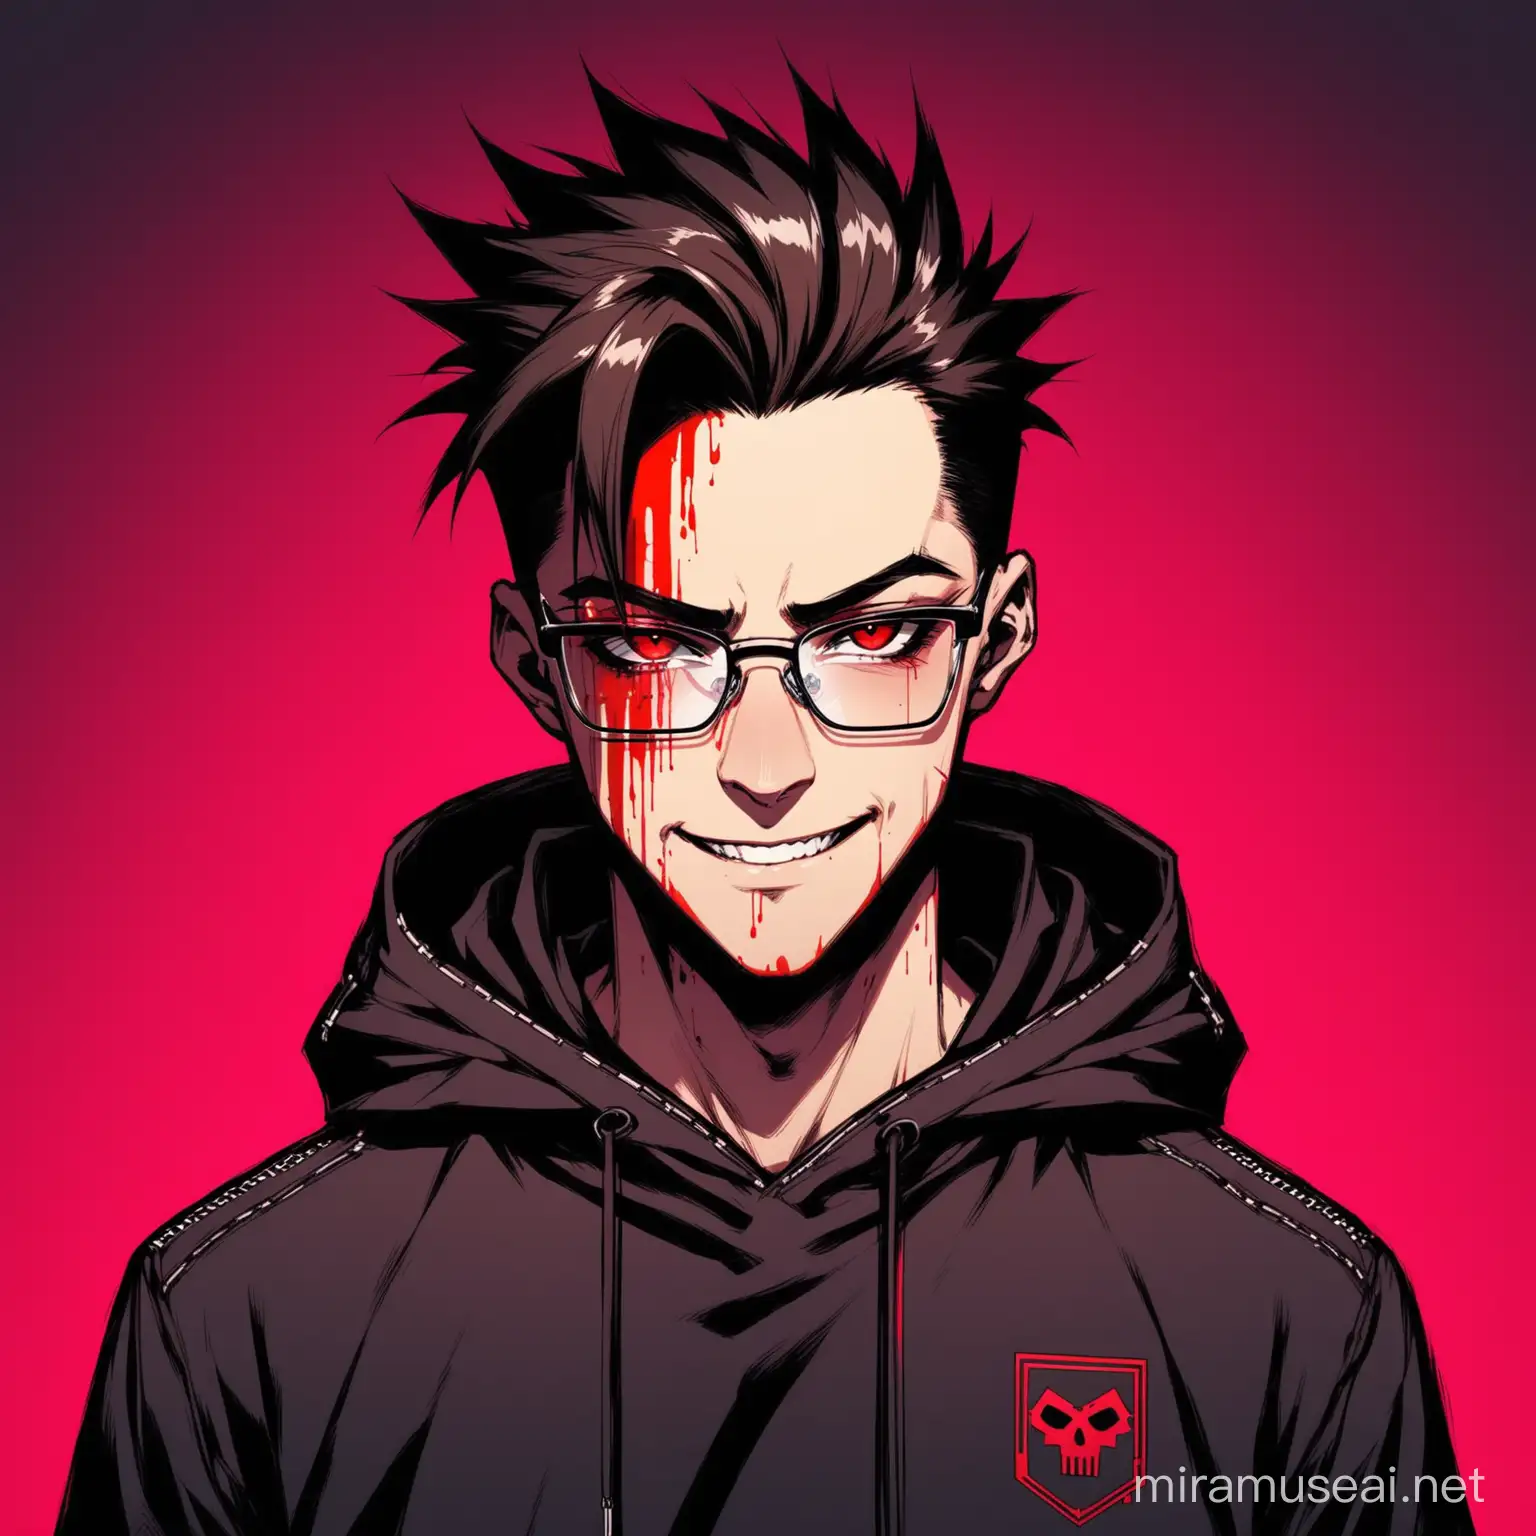 cool,hacker,cyberpunk hoodie,glasses,quiff hairs,oblong face,big nose,small mouth,m shape hairline,handsome,aesthetic,psycho smile,gradient background,blood on face,red eyes
